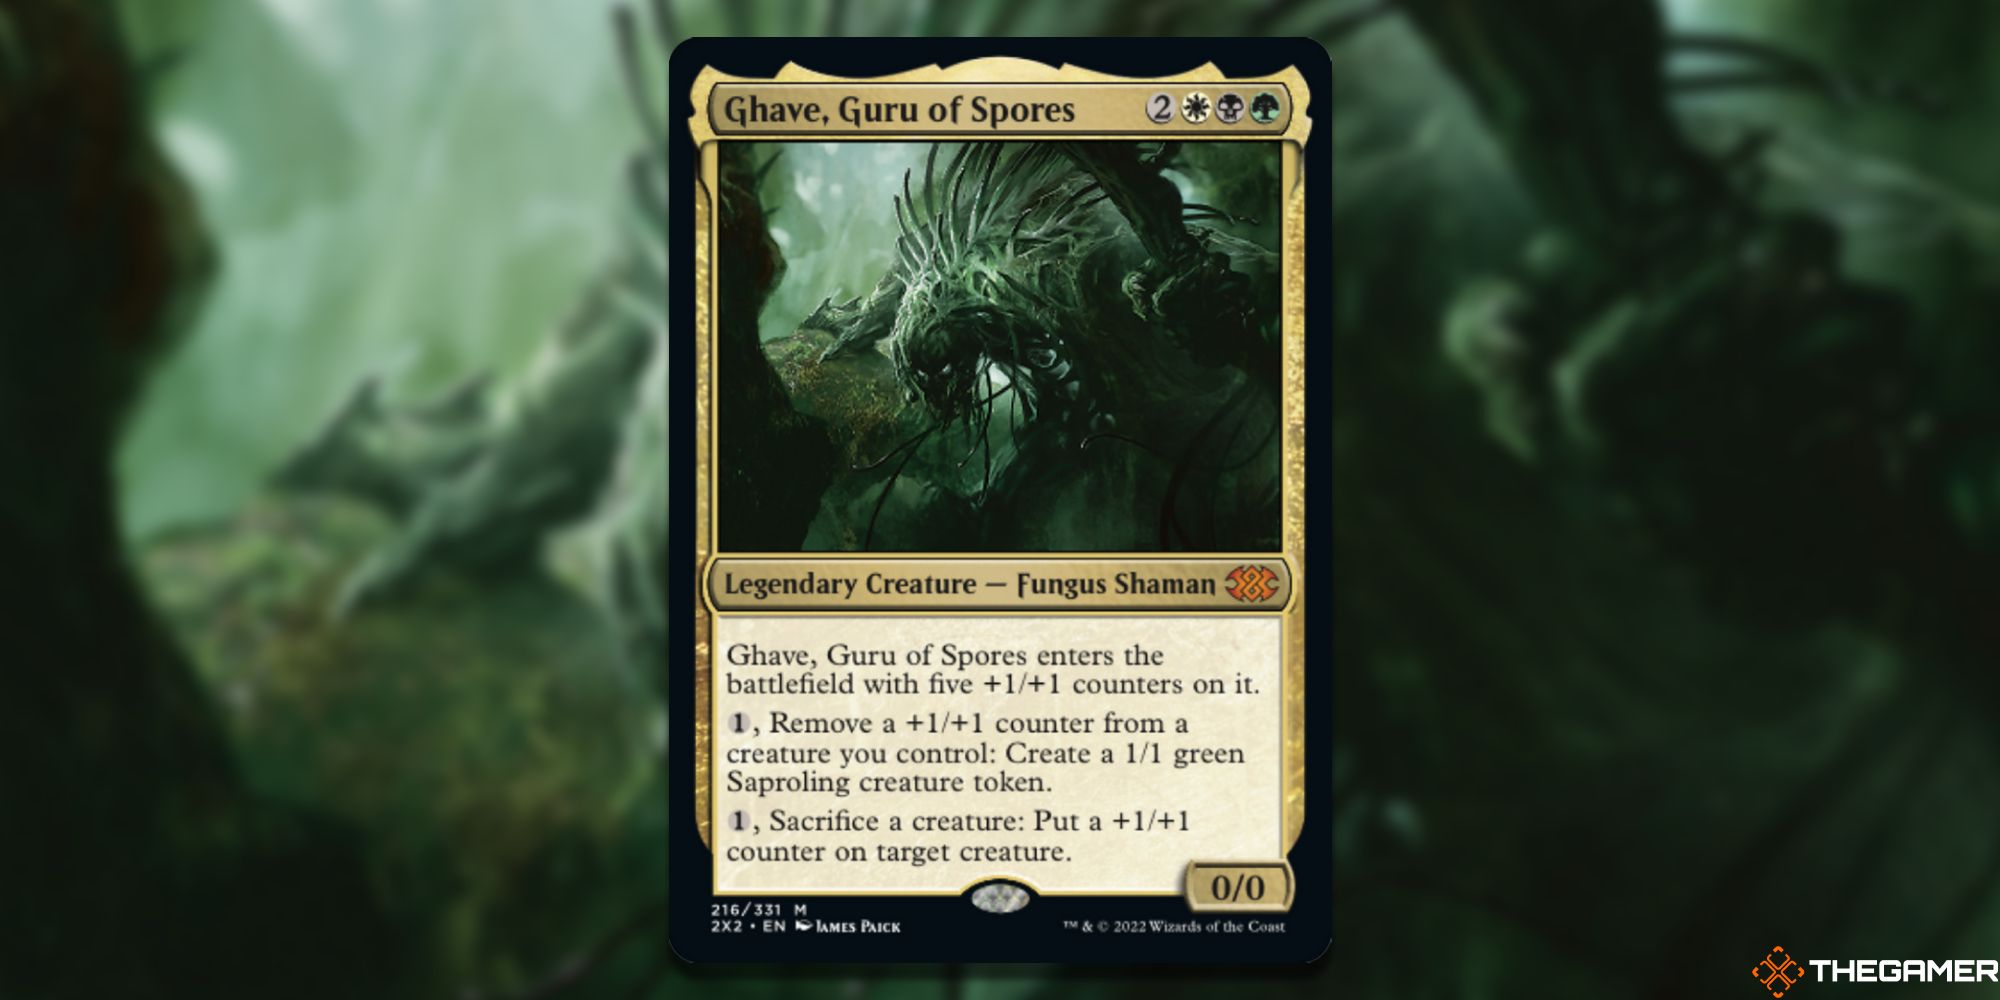 Image of the Ghave, Guru of Spores  card in Magic: The Gathering, with art by James Paick